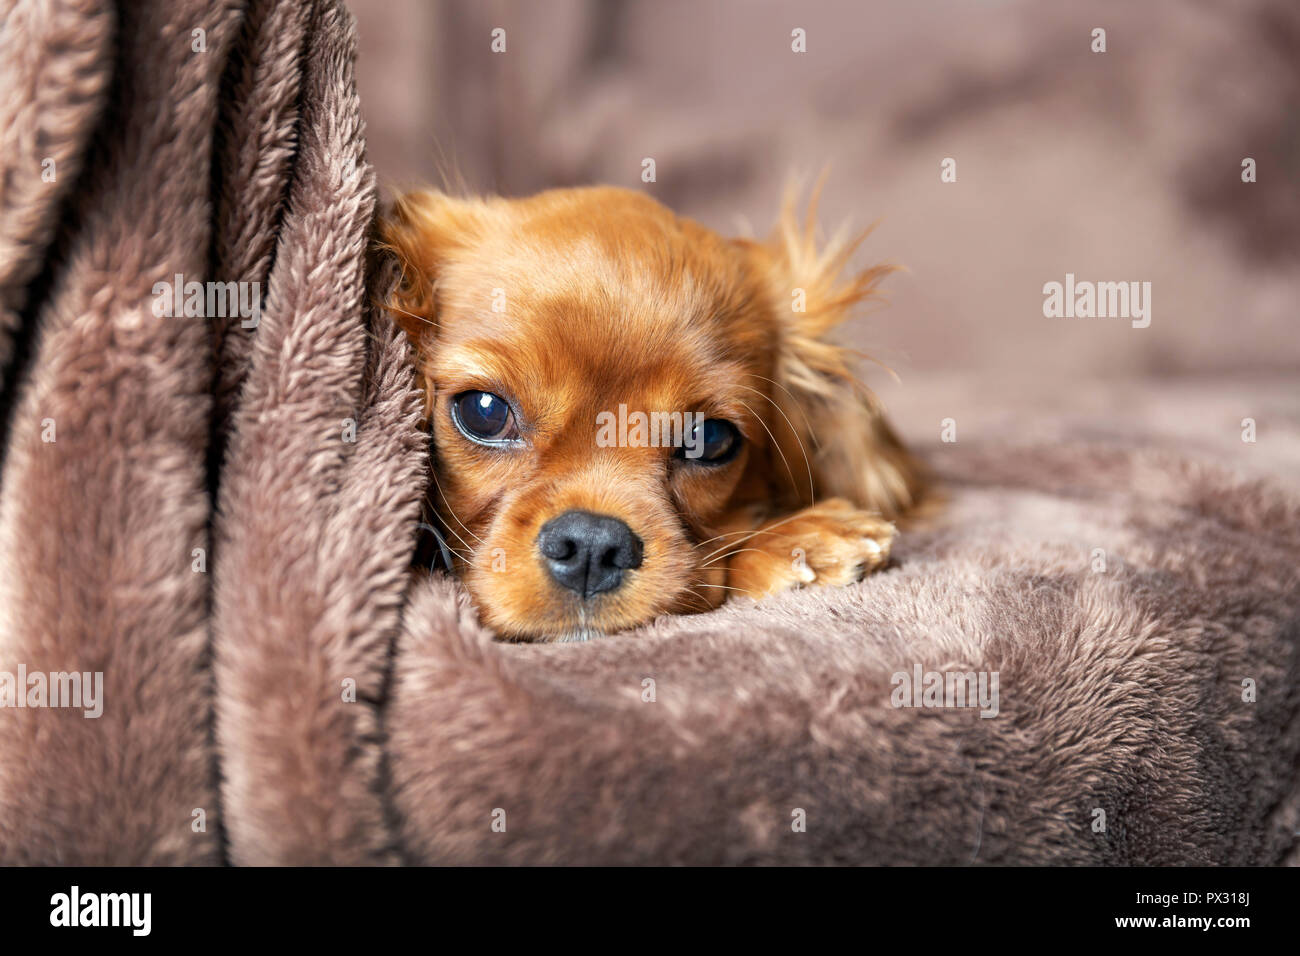 Cute puppy lying on the warm blanket Stock Photo